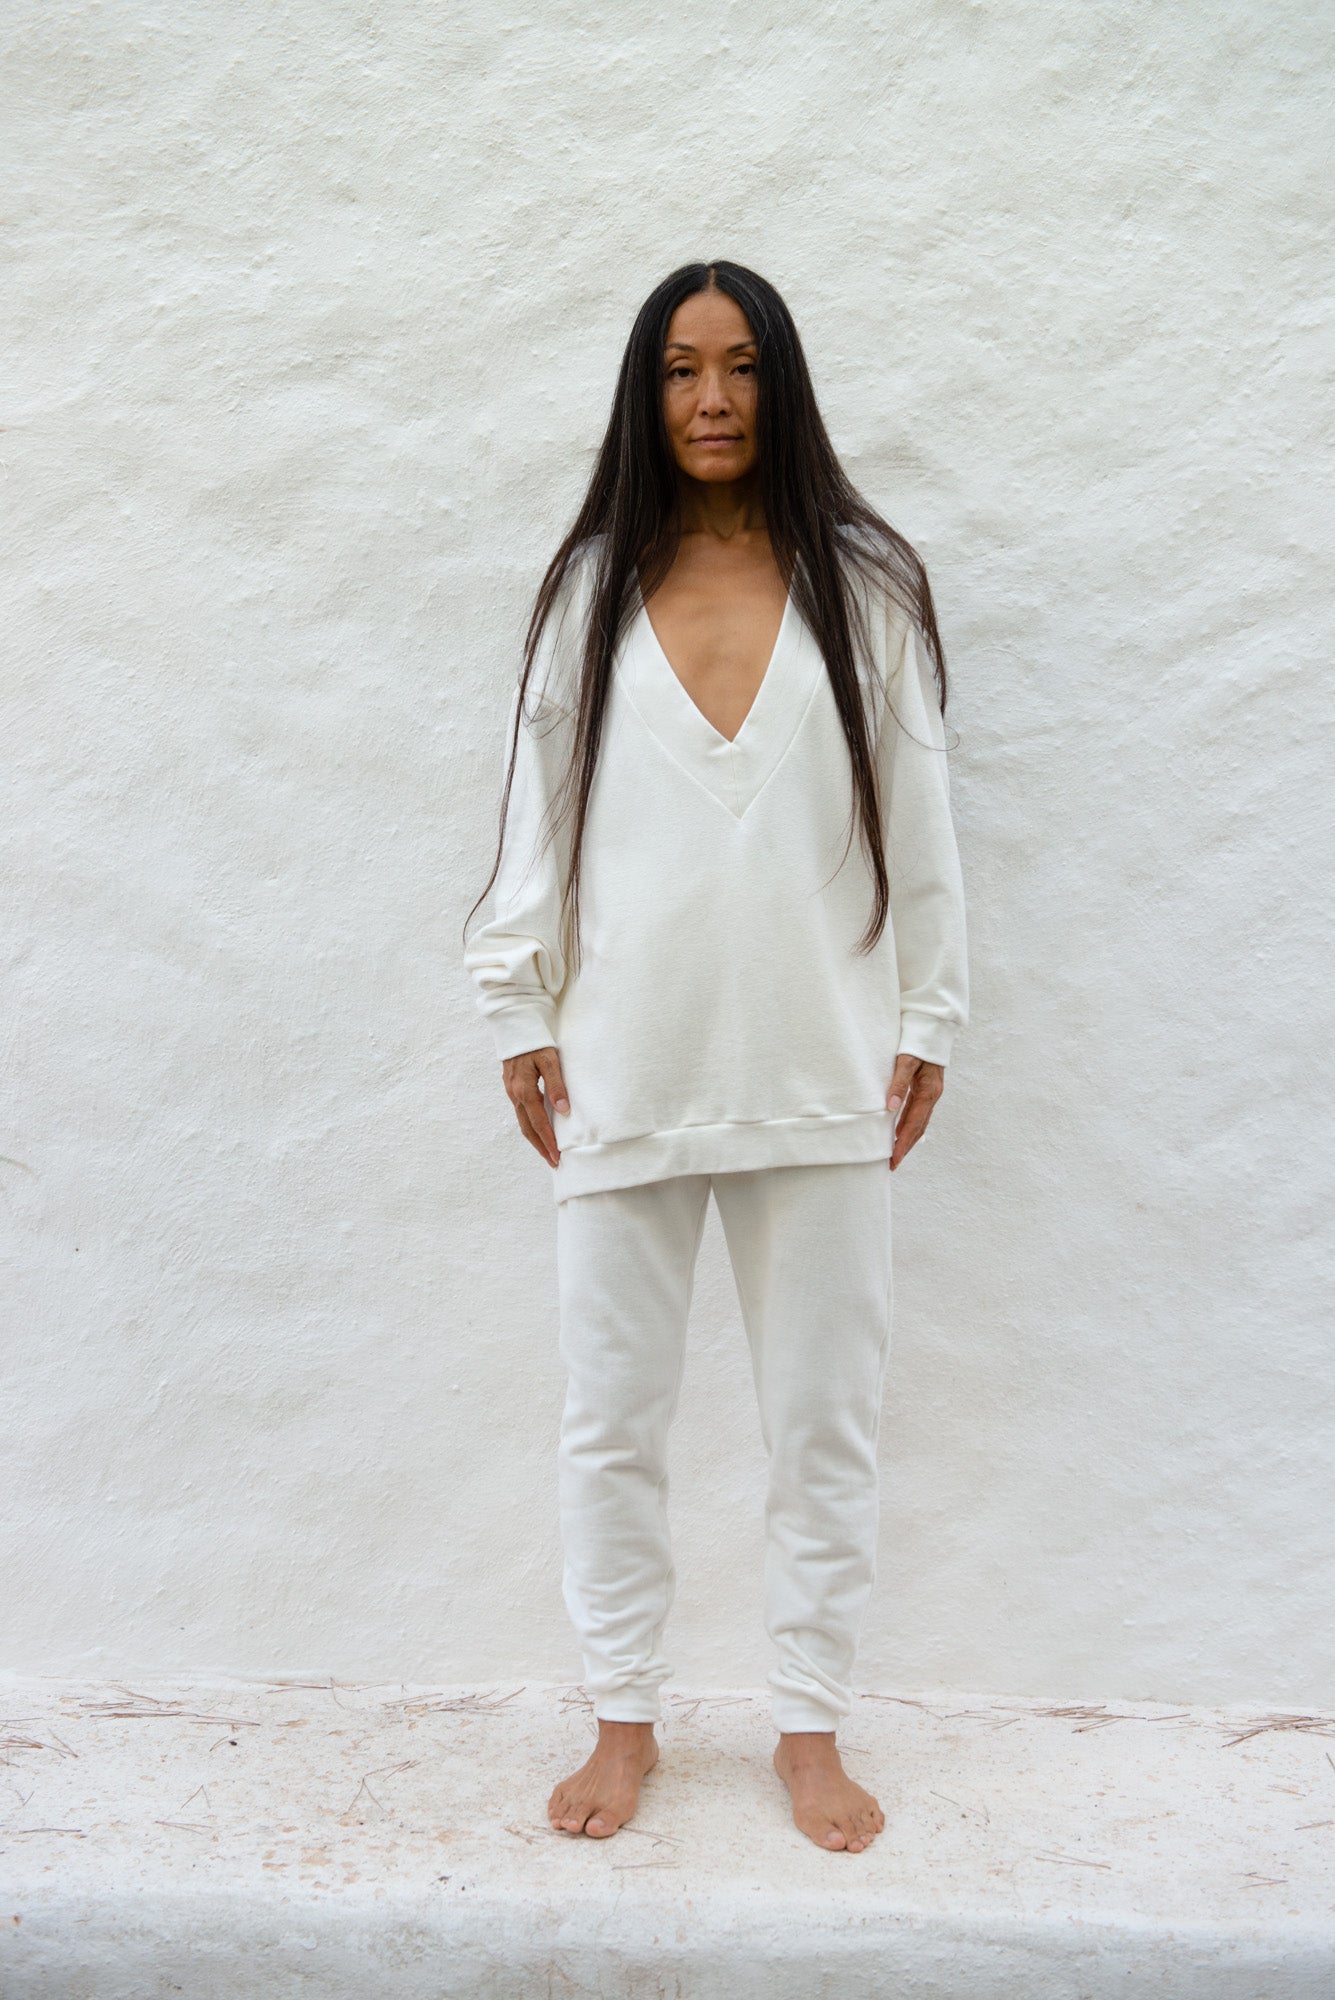 Classic V neck sweater in off white by Can Pep Rey